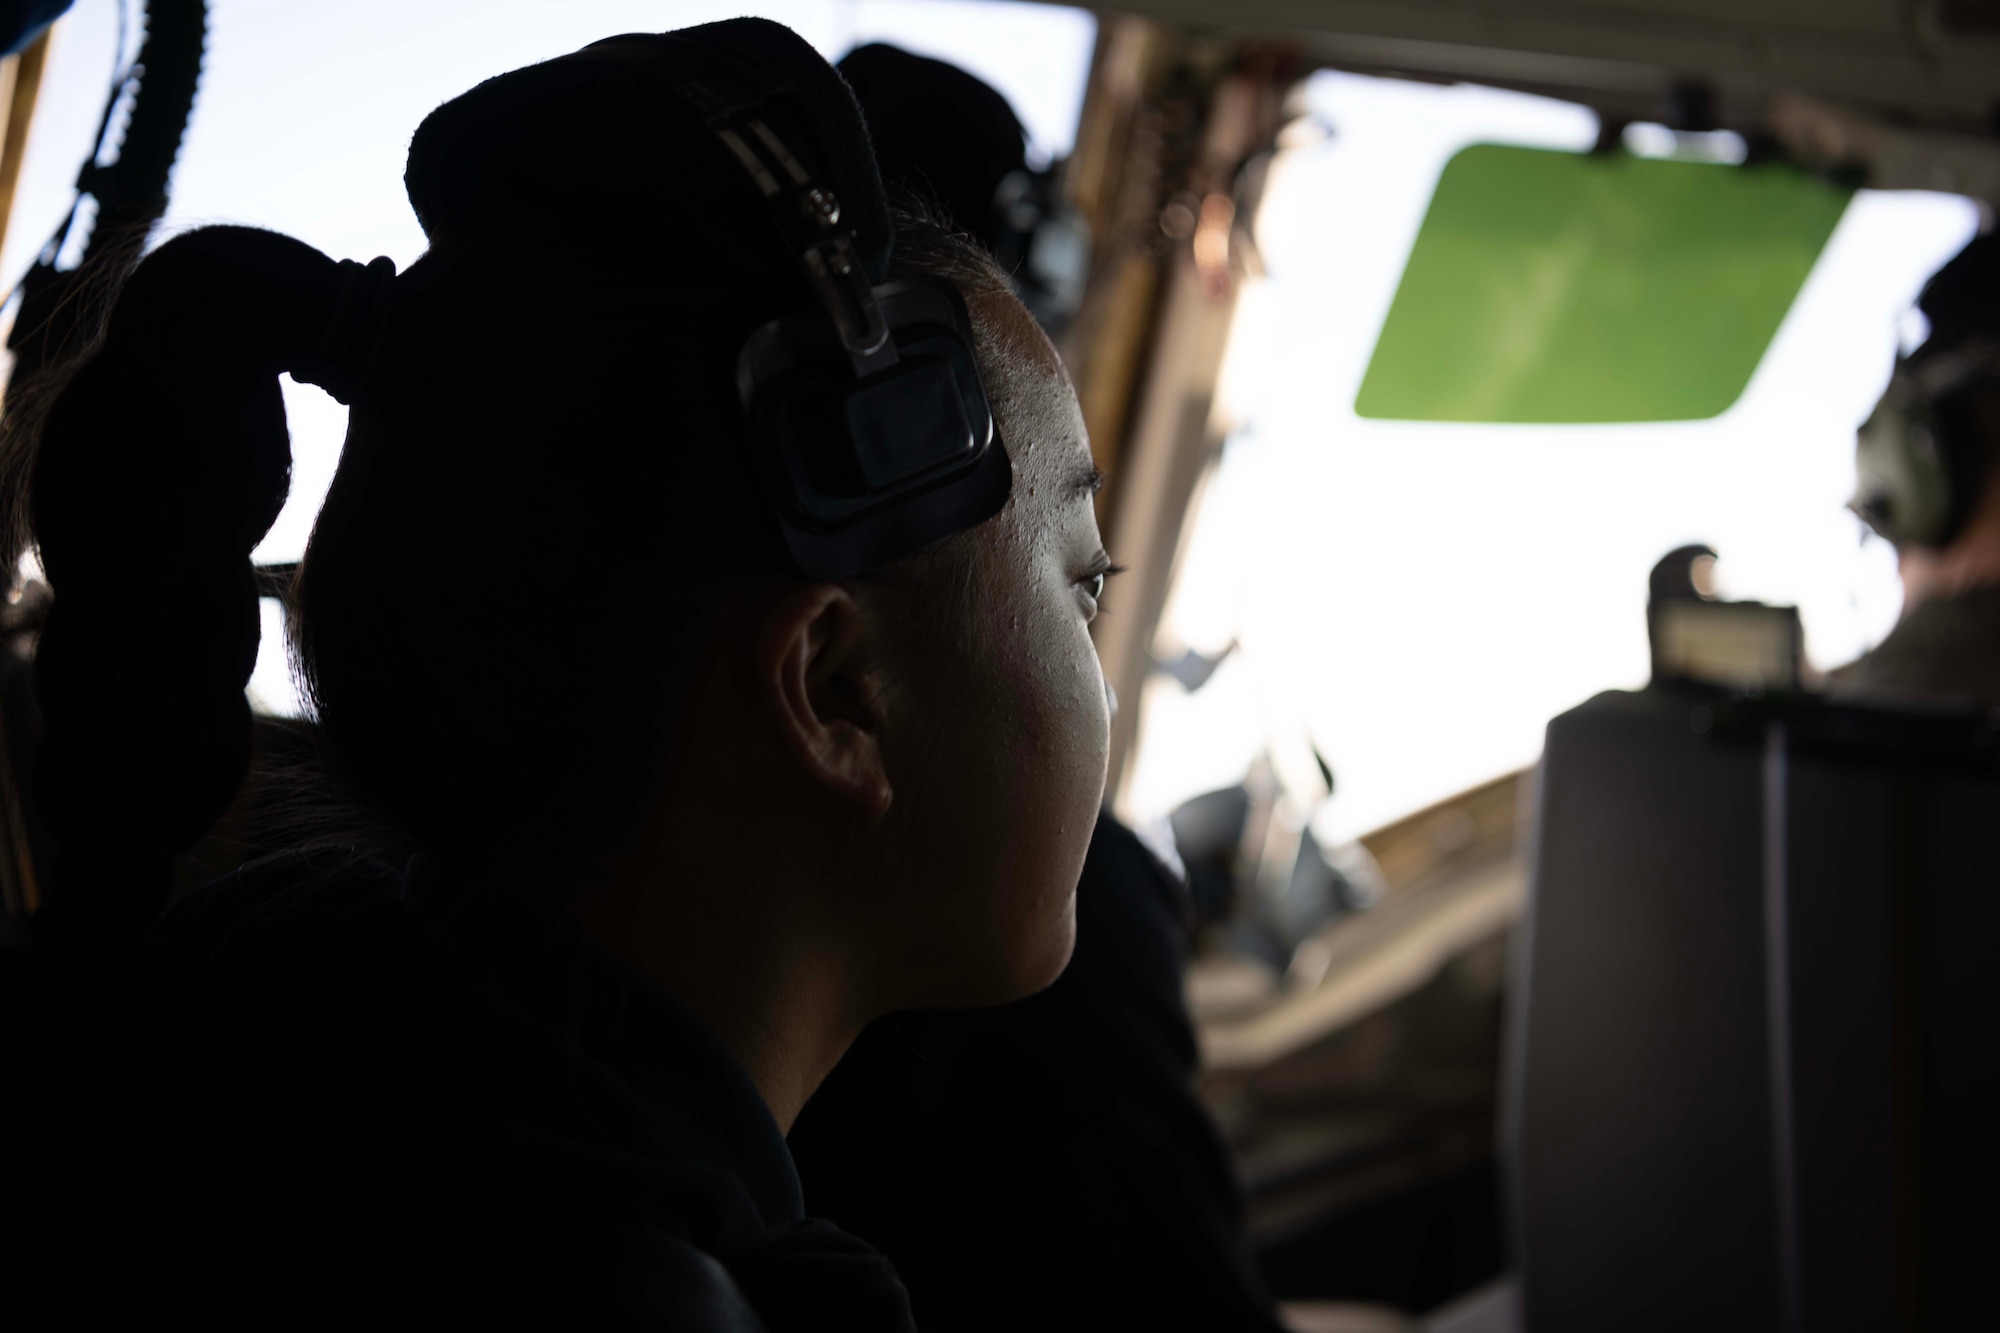 An Air Force cadet sits in the flightdeck of a military aircraft